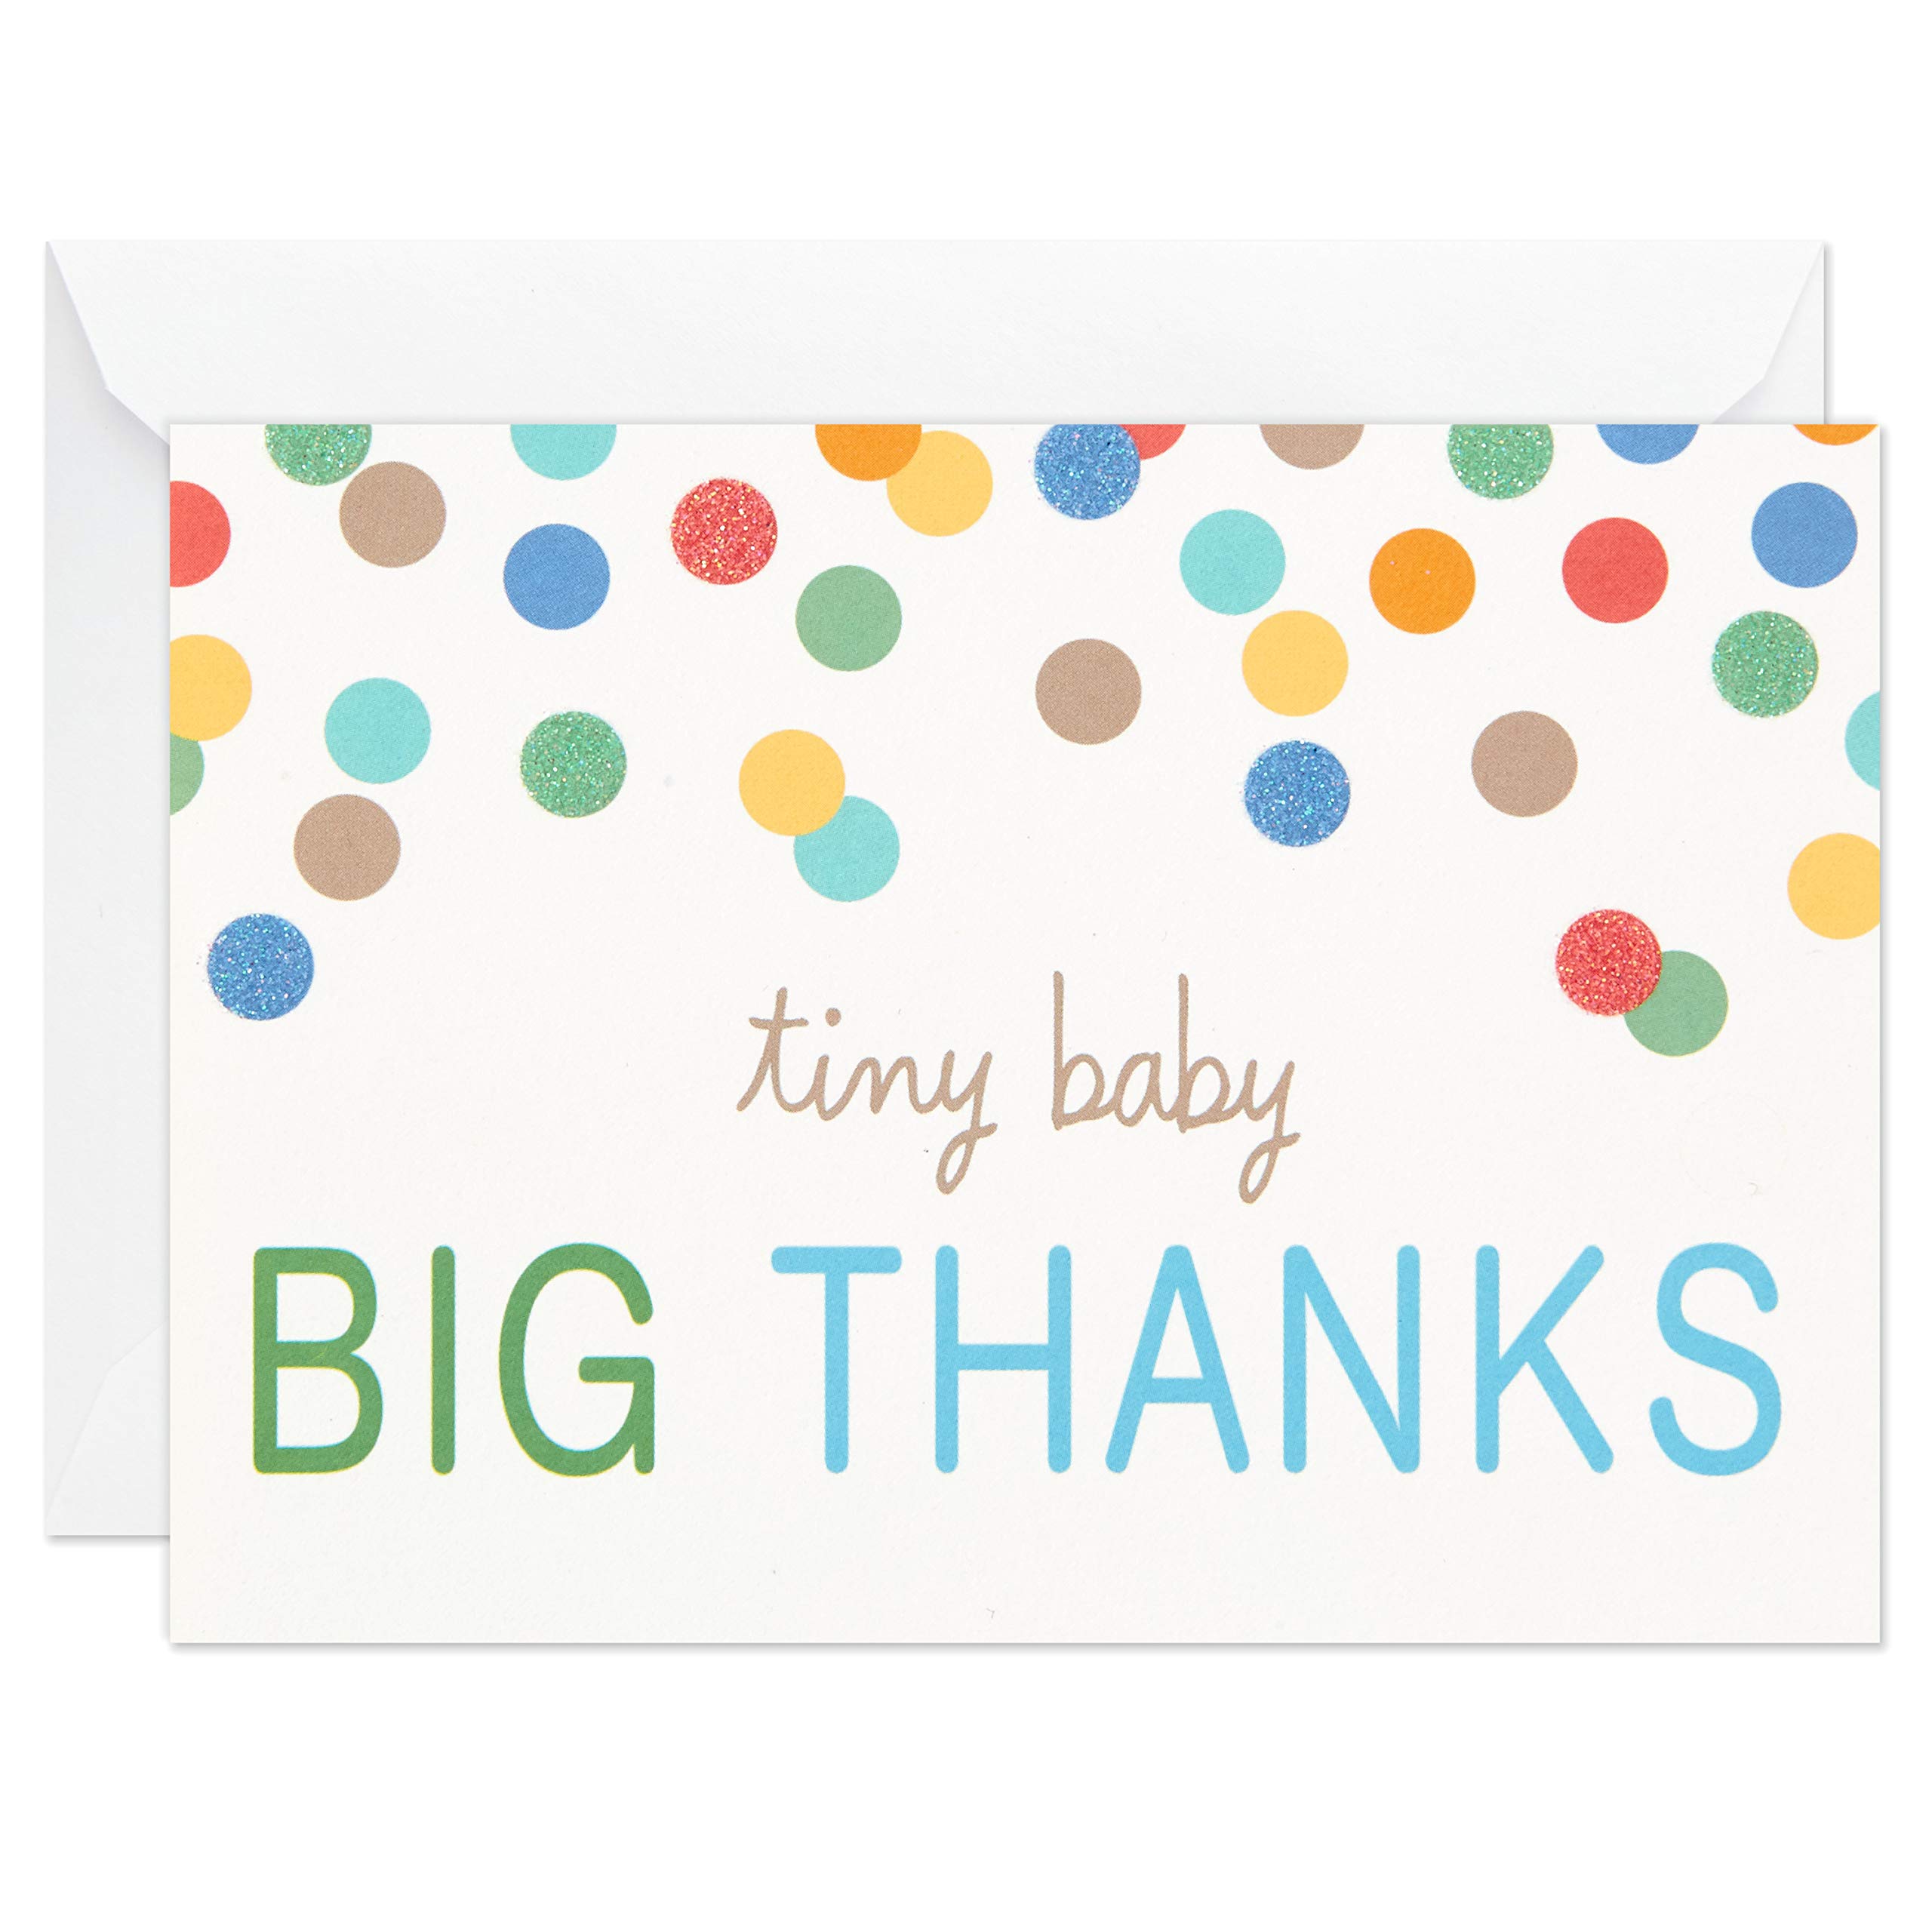 Hallmark Baby Shower Thank You Cards Assortment, Zoo Animals (50 Cards with Envelopes for Baby Boy or Baby Girl) Elephant, Giraffe, Monkey